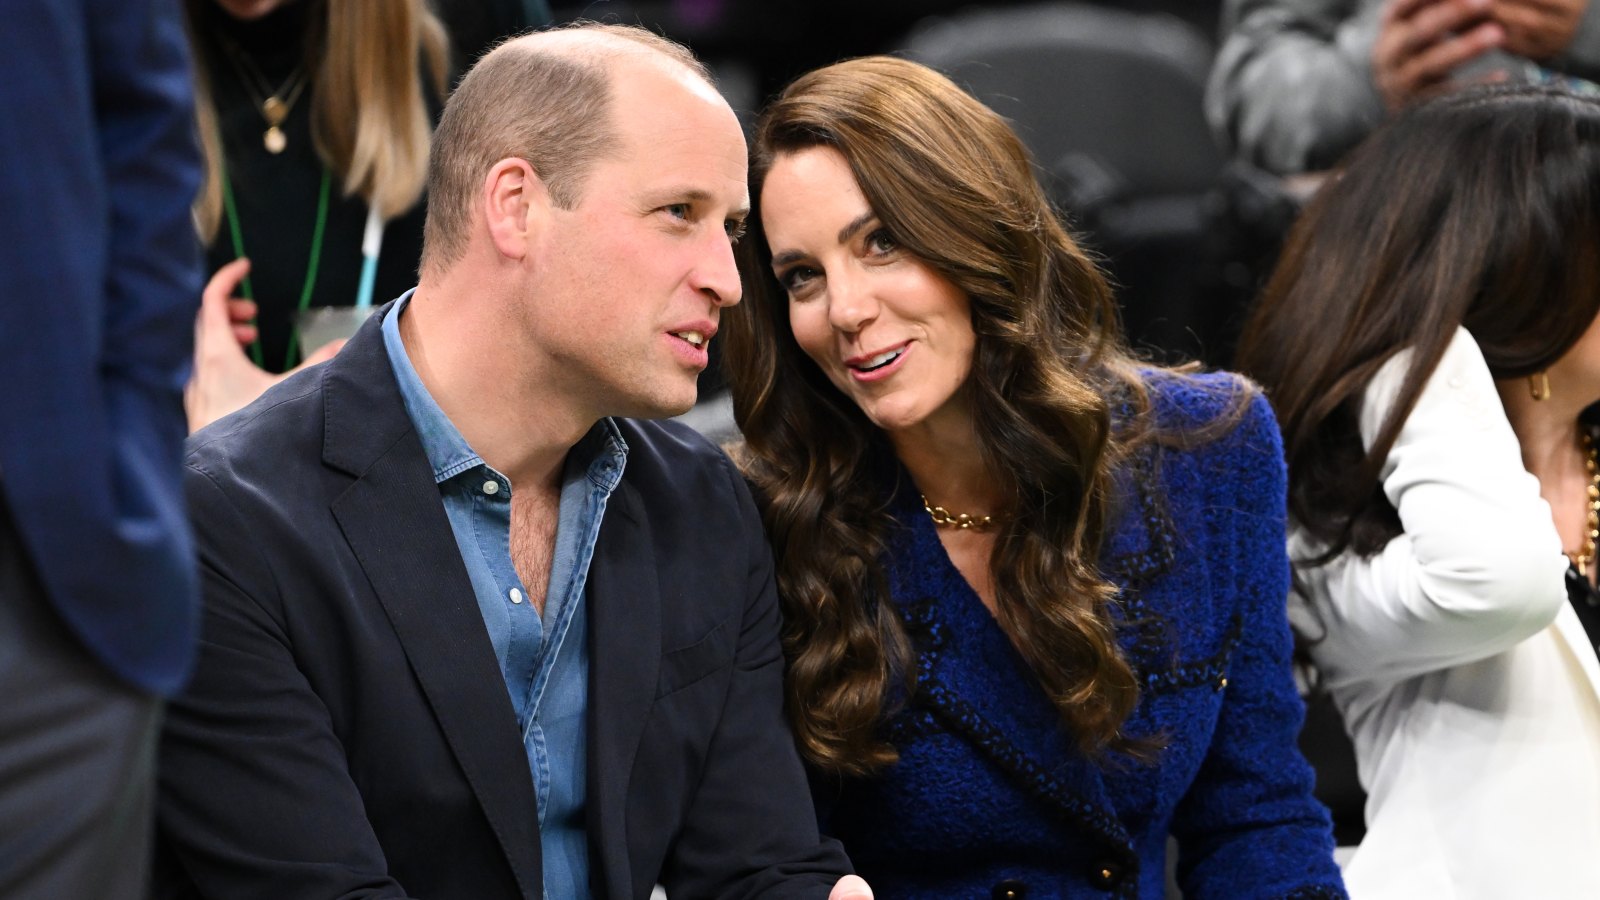 The Prince And Princess Of Wales Attend Boston Celtics Game